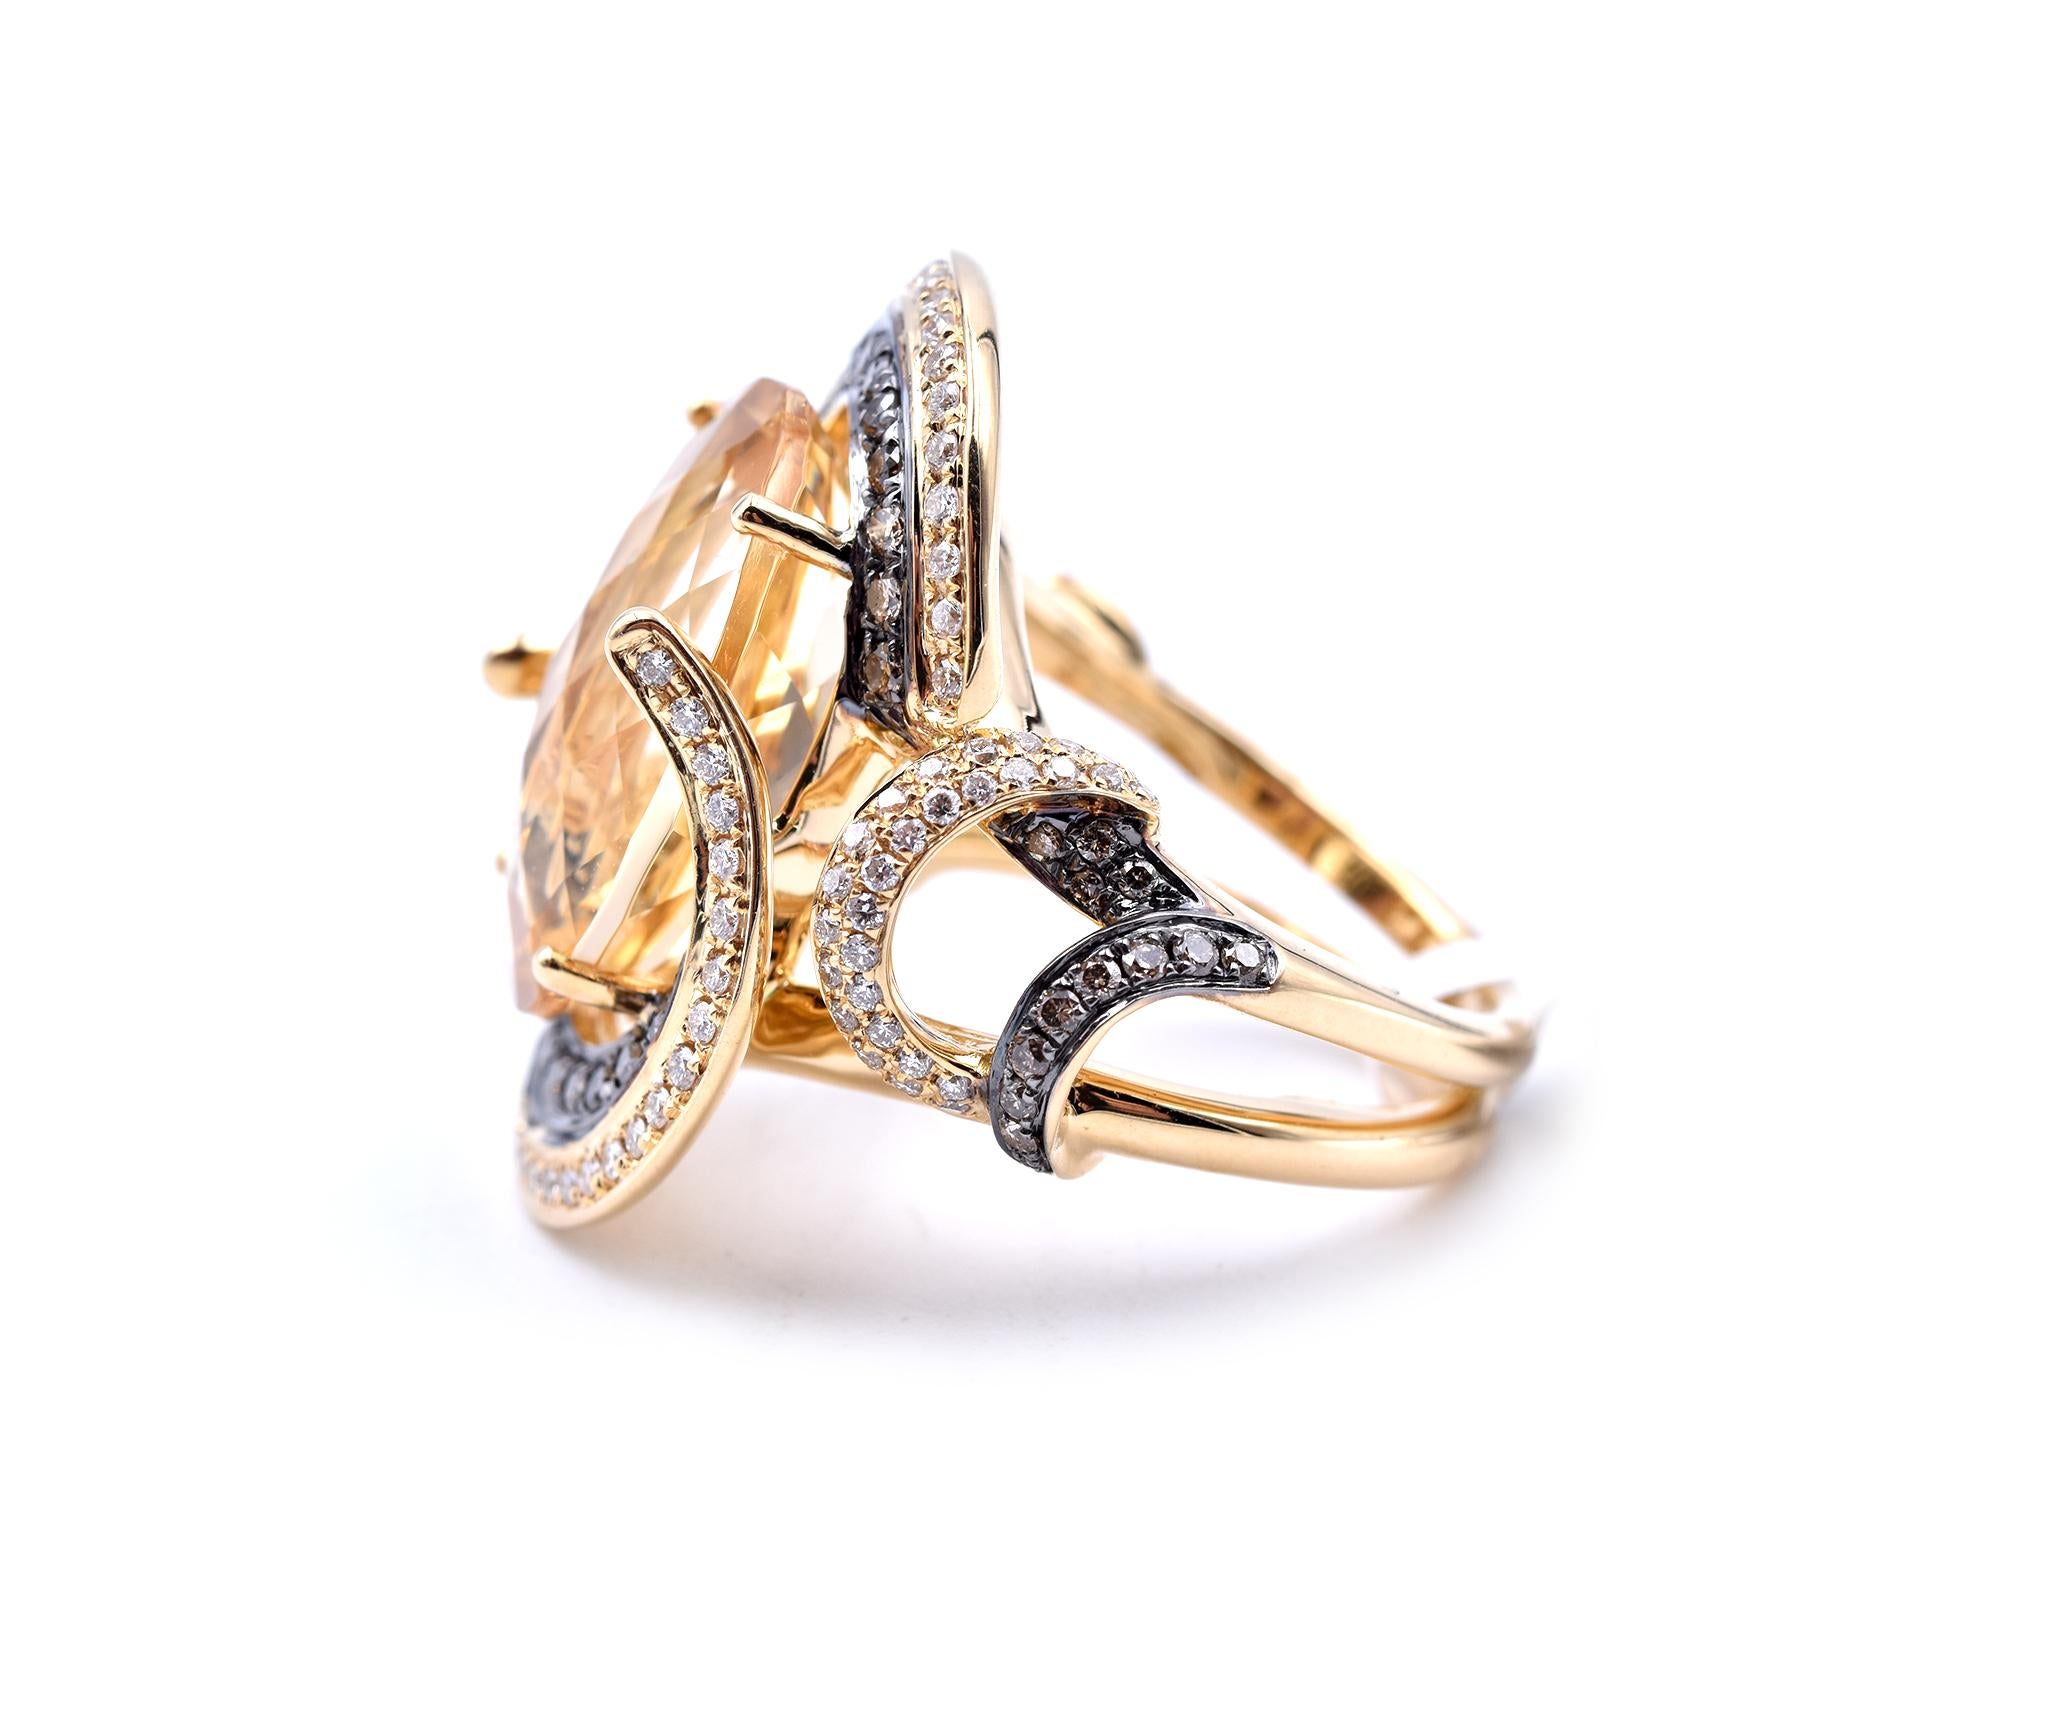 18 Karat Yellow Gold Citrine and Diamond Cocktail Ring In Excellent Condition For Sale In Scottsdale, AZ